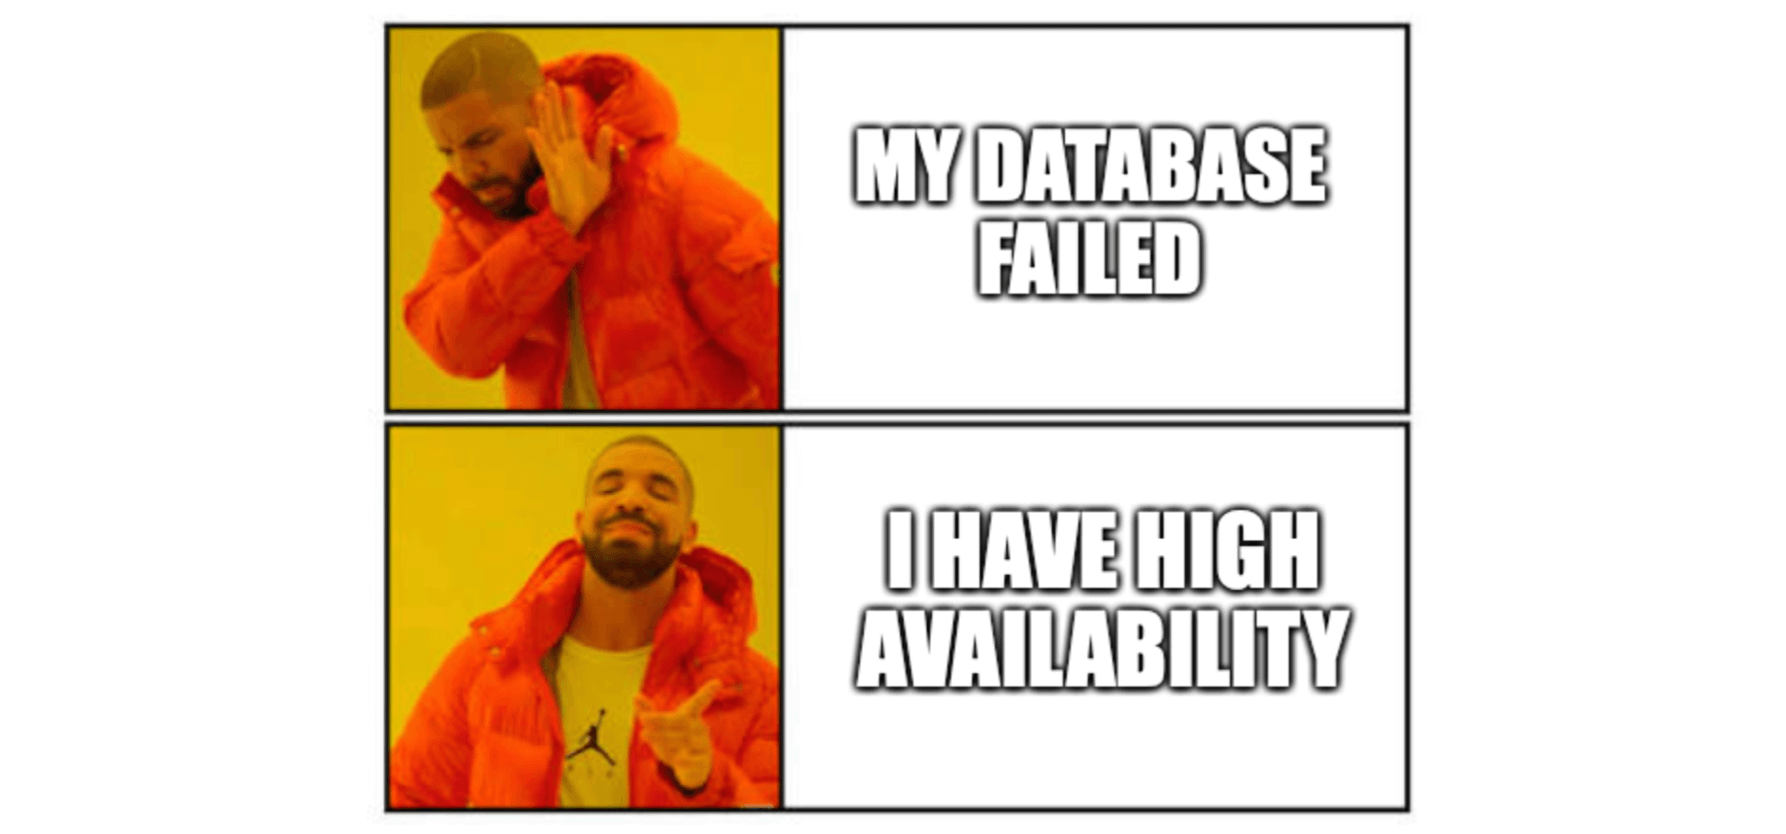 How High Availability Works in Our Cloud Database